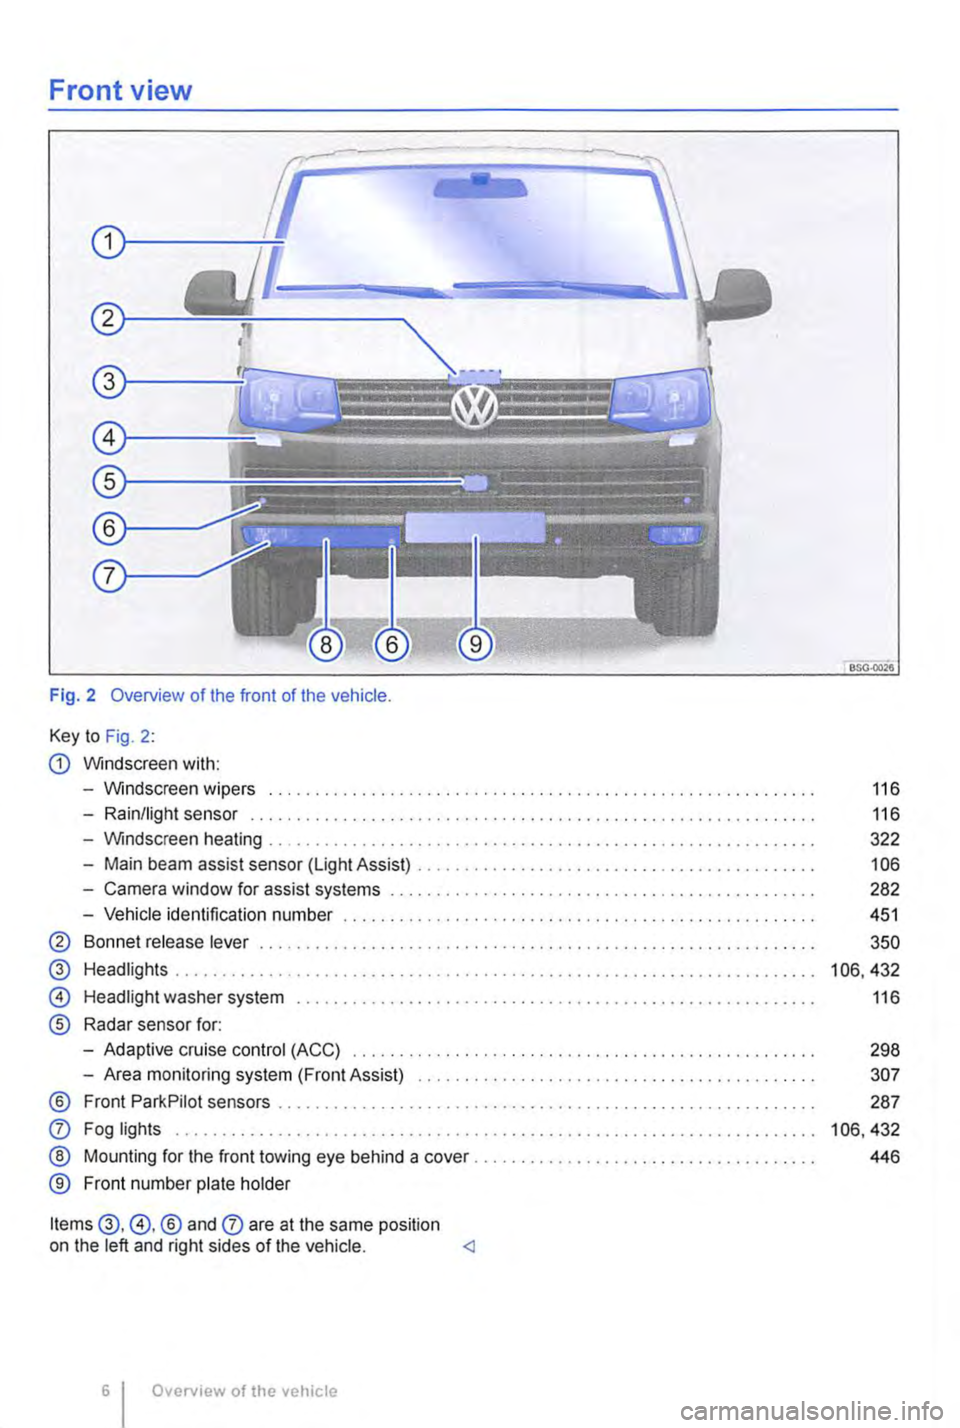 VOLKSWAGEN TRANSPORTER 2019  Owners Manual Front view 
Fig. 2 Overview of the front of the vehicle. 
Key to Fig. 2: 
G) Windscreen with: 
-Windscreen wipers .............. . 
-Rain/light sensor .............. . 
-Windscreen heating 
-Main beam